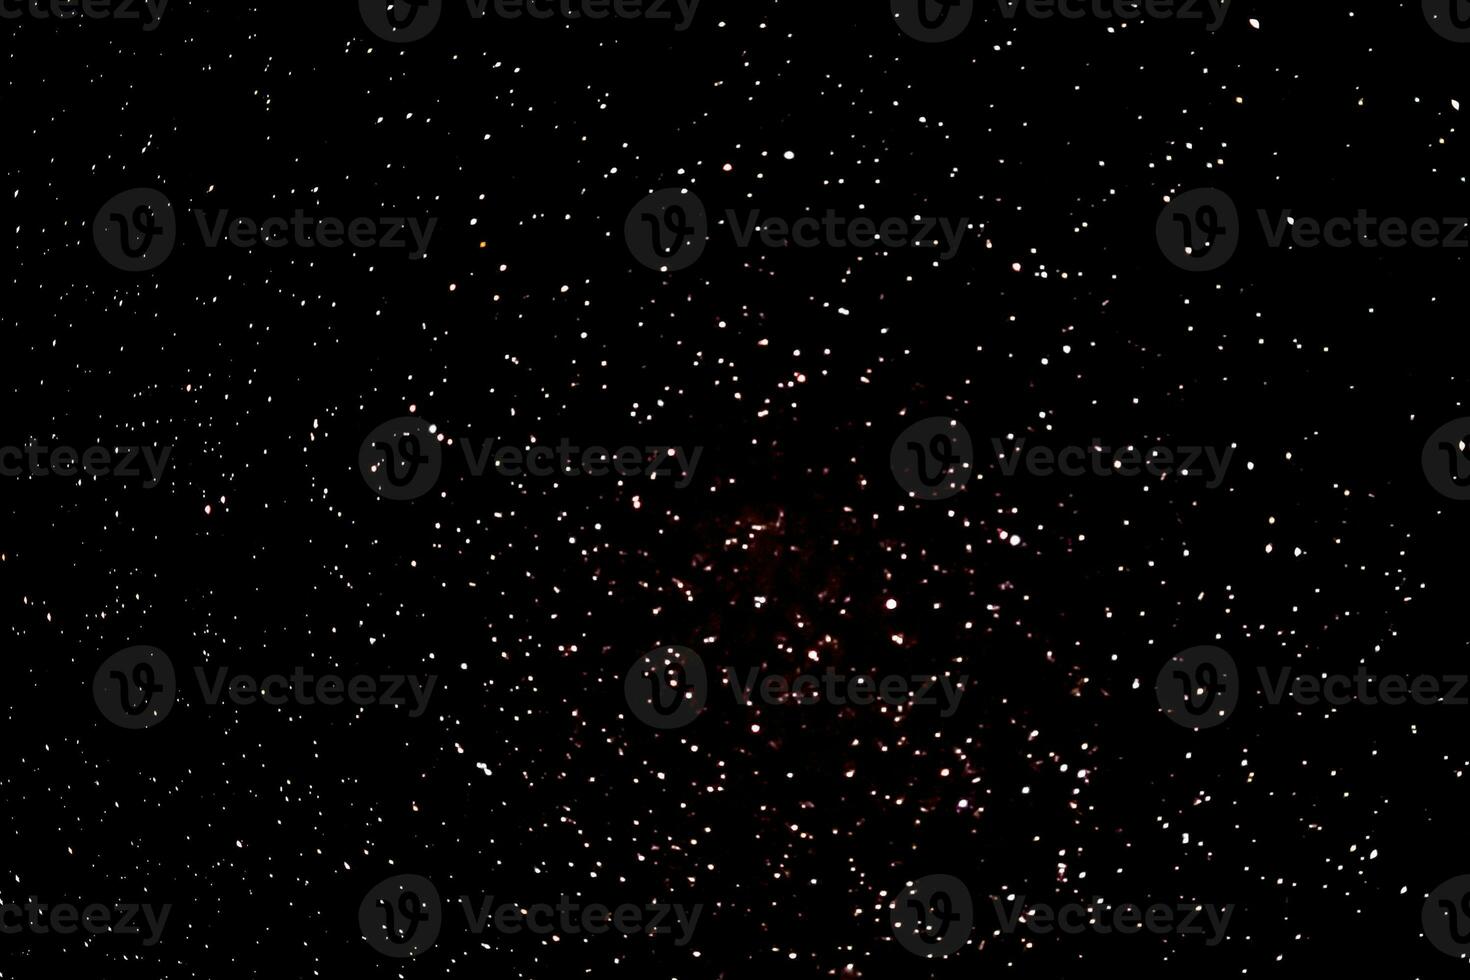 stars in the night sky, image stars background texture. photo